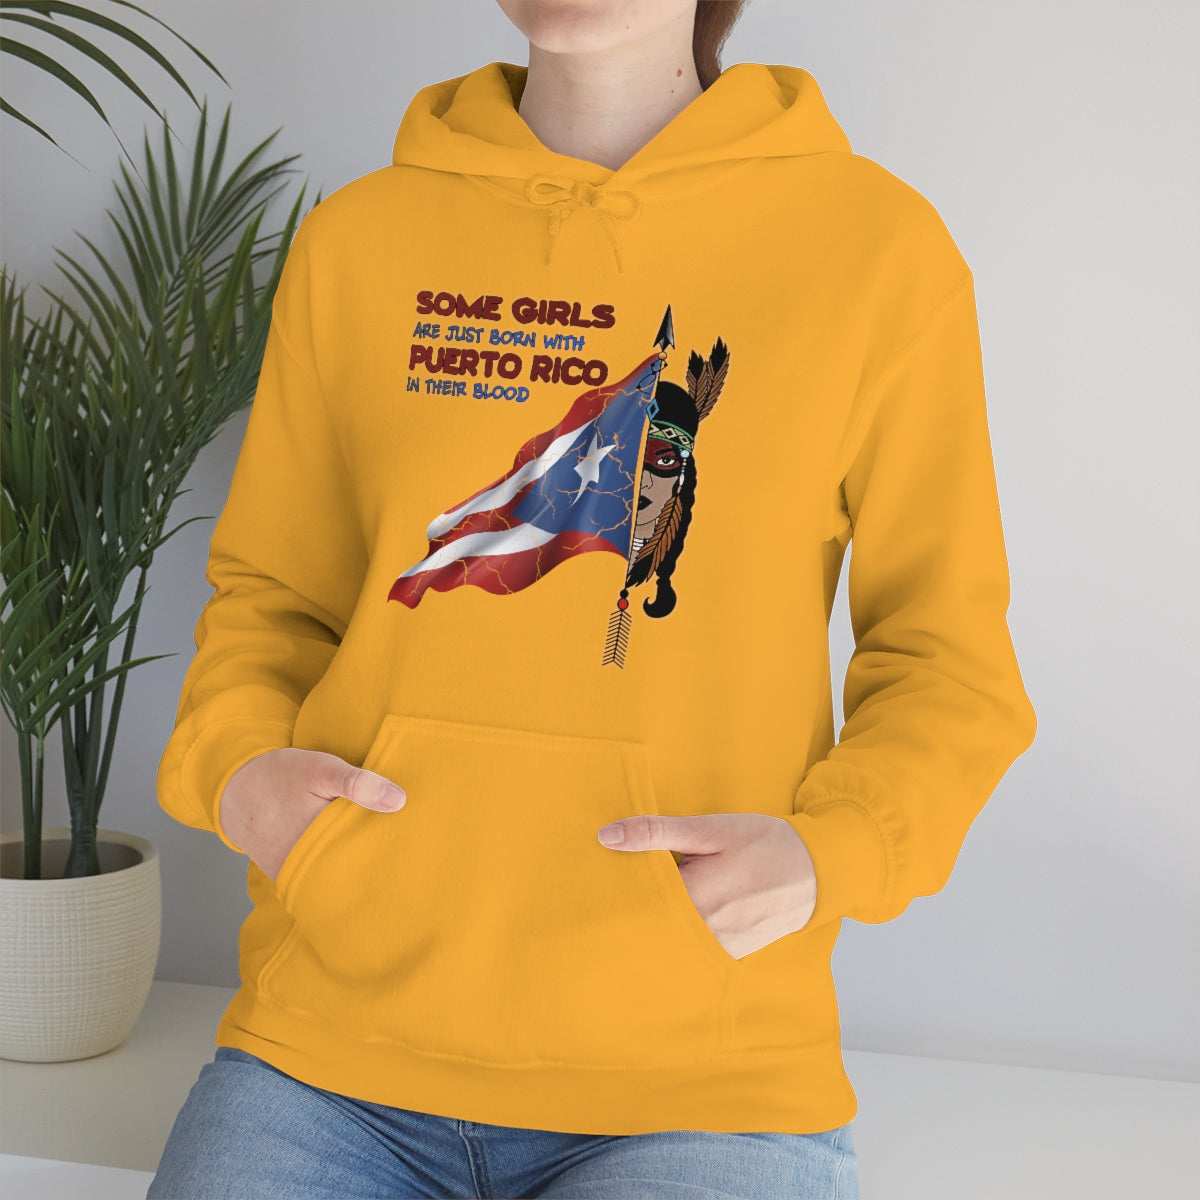 Some Girls Are Just Born With It - Unisex Heavy Blend™ Hoodie (Sm-5XL)